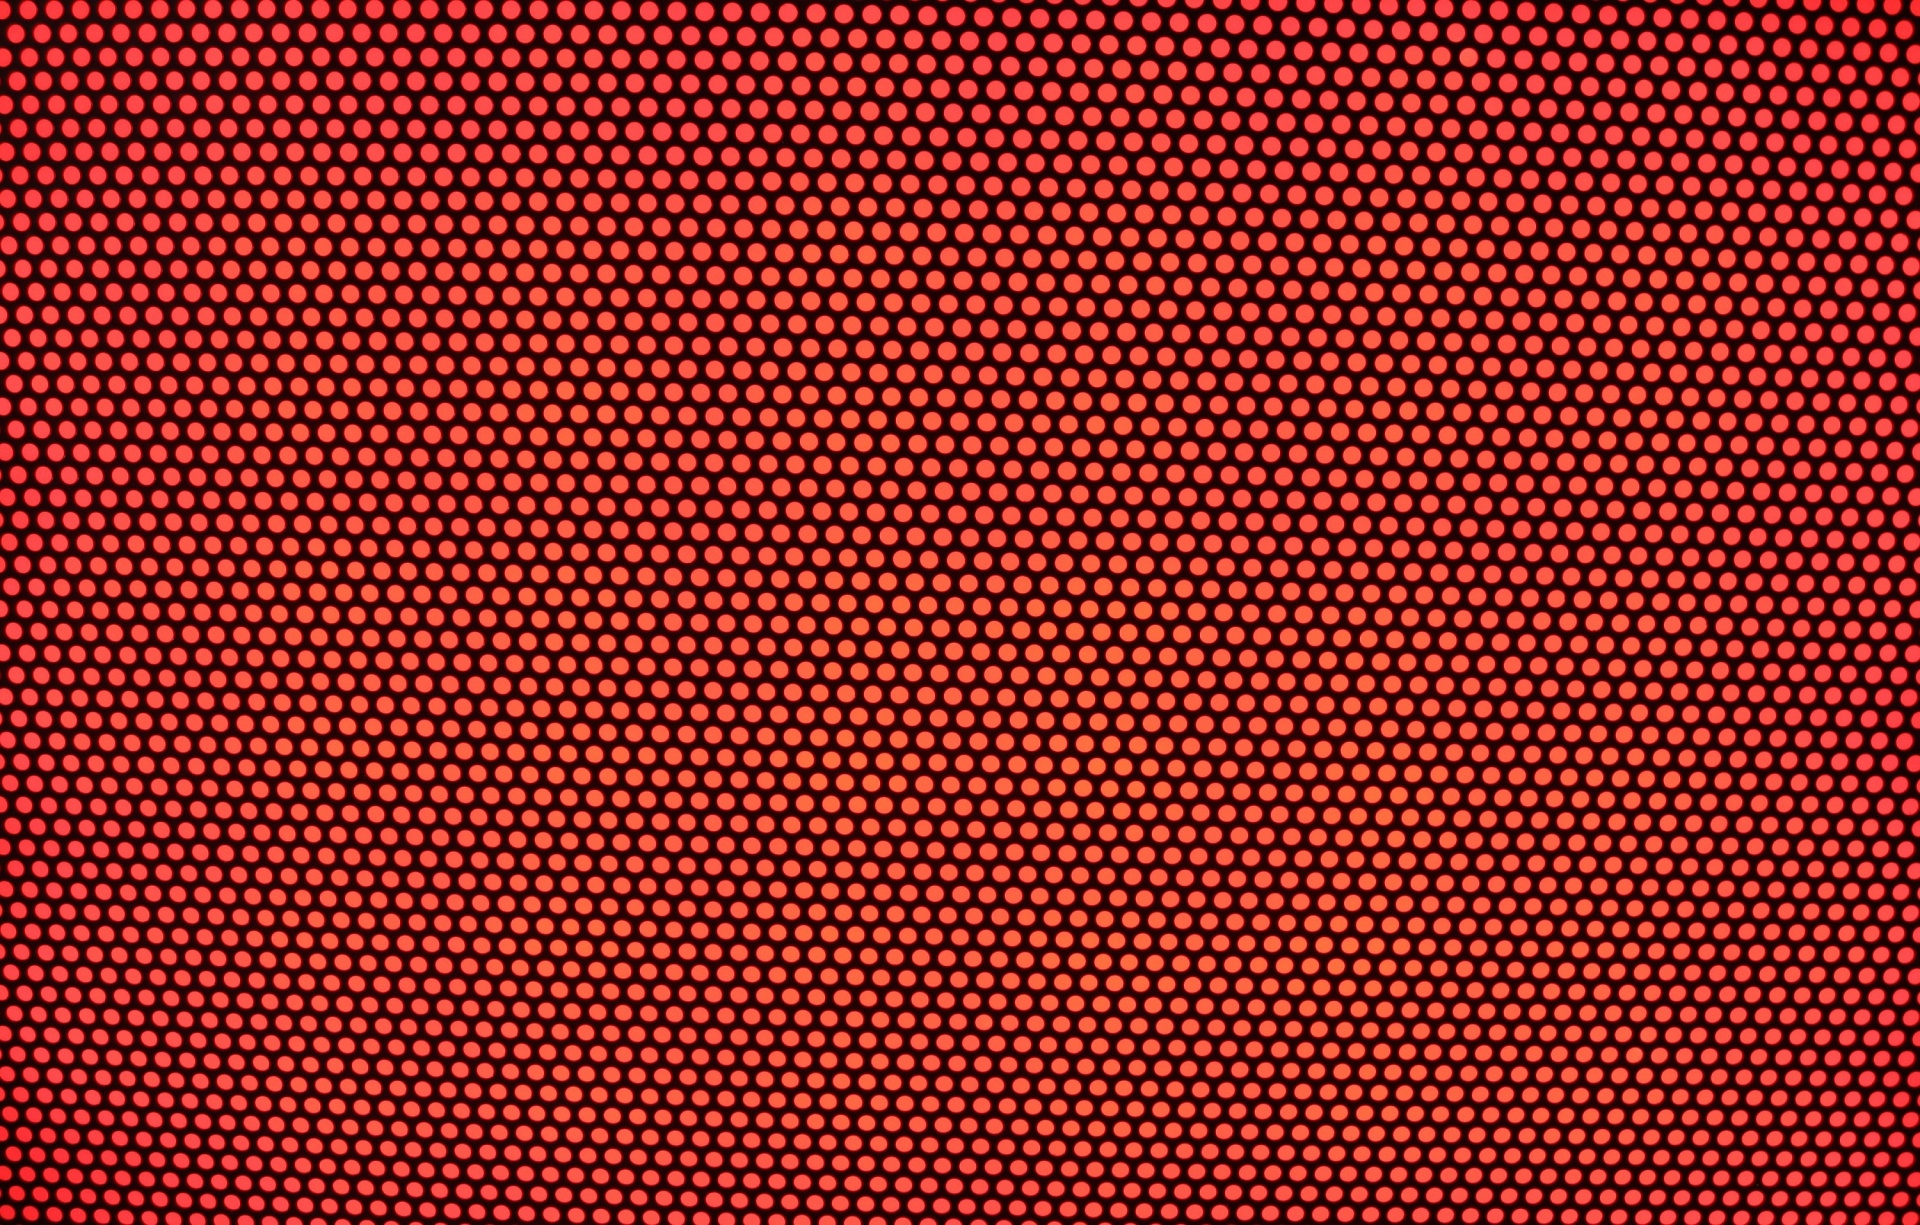 Red,dots,pattern,wallpaper,background - free image from 